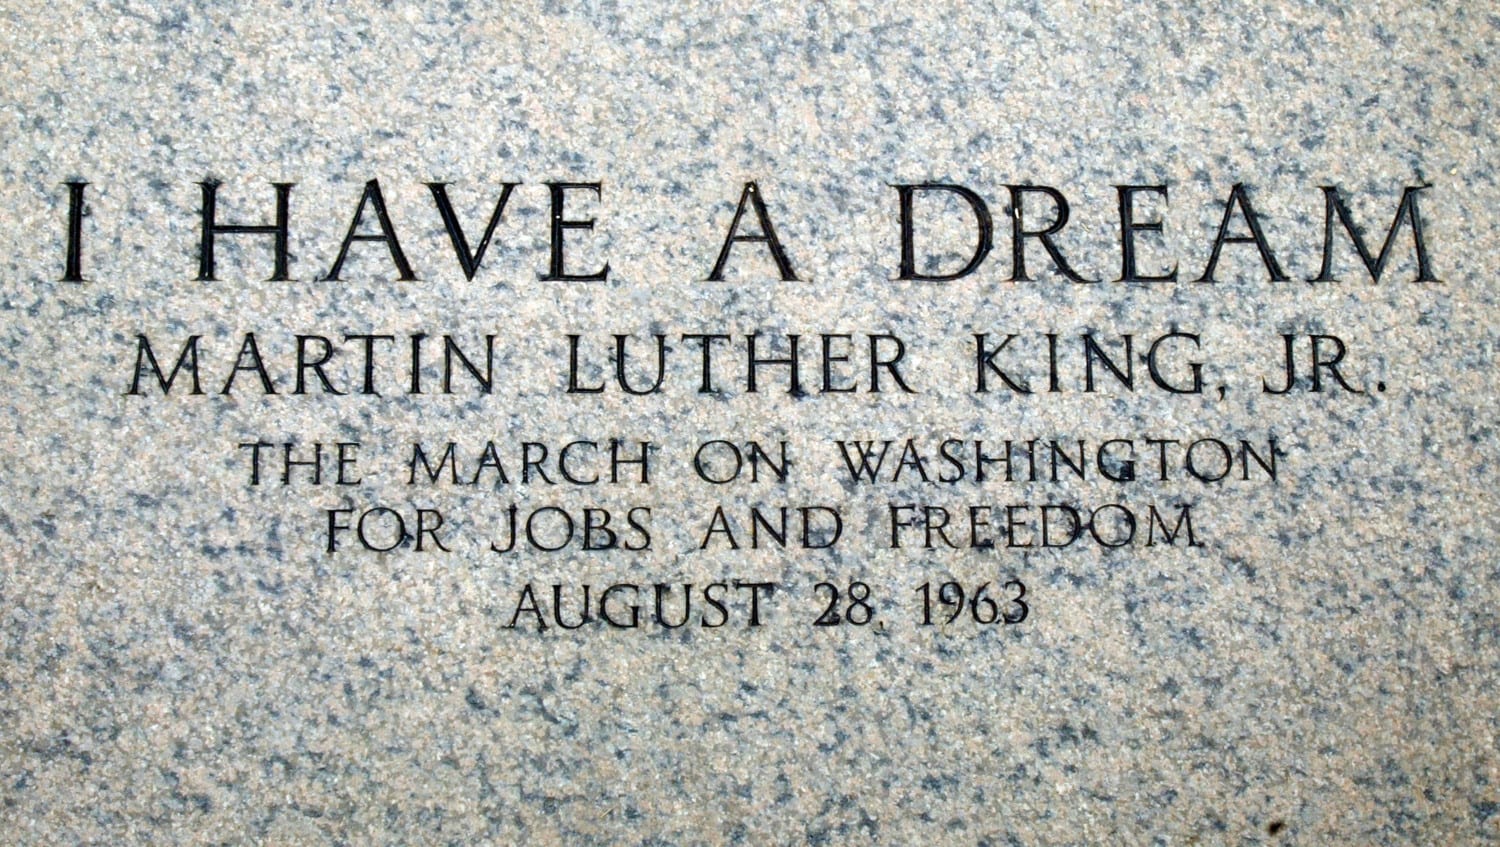 martin luther king jr photo